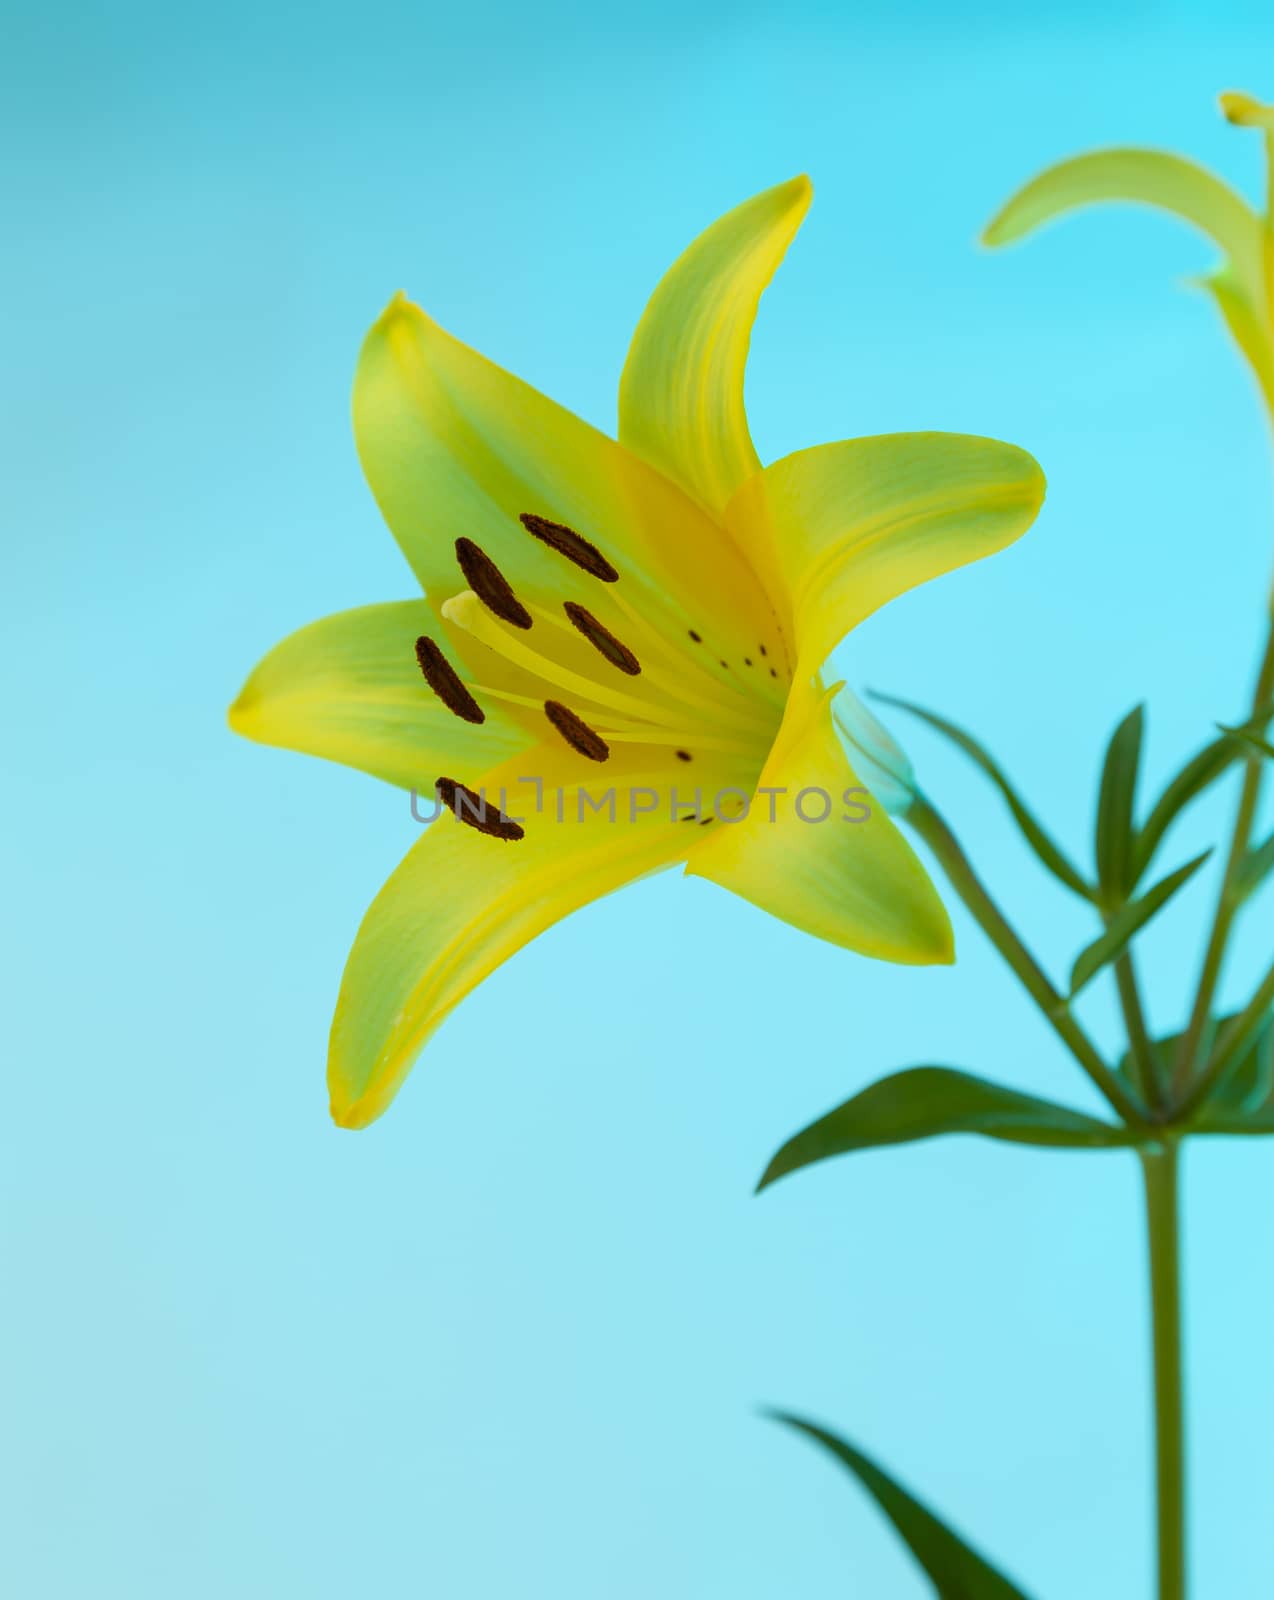 A yellow Asiatic Lily Lillium flower with green stem and leaves on a blue background.